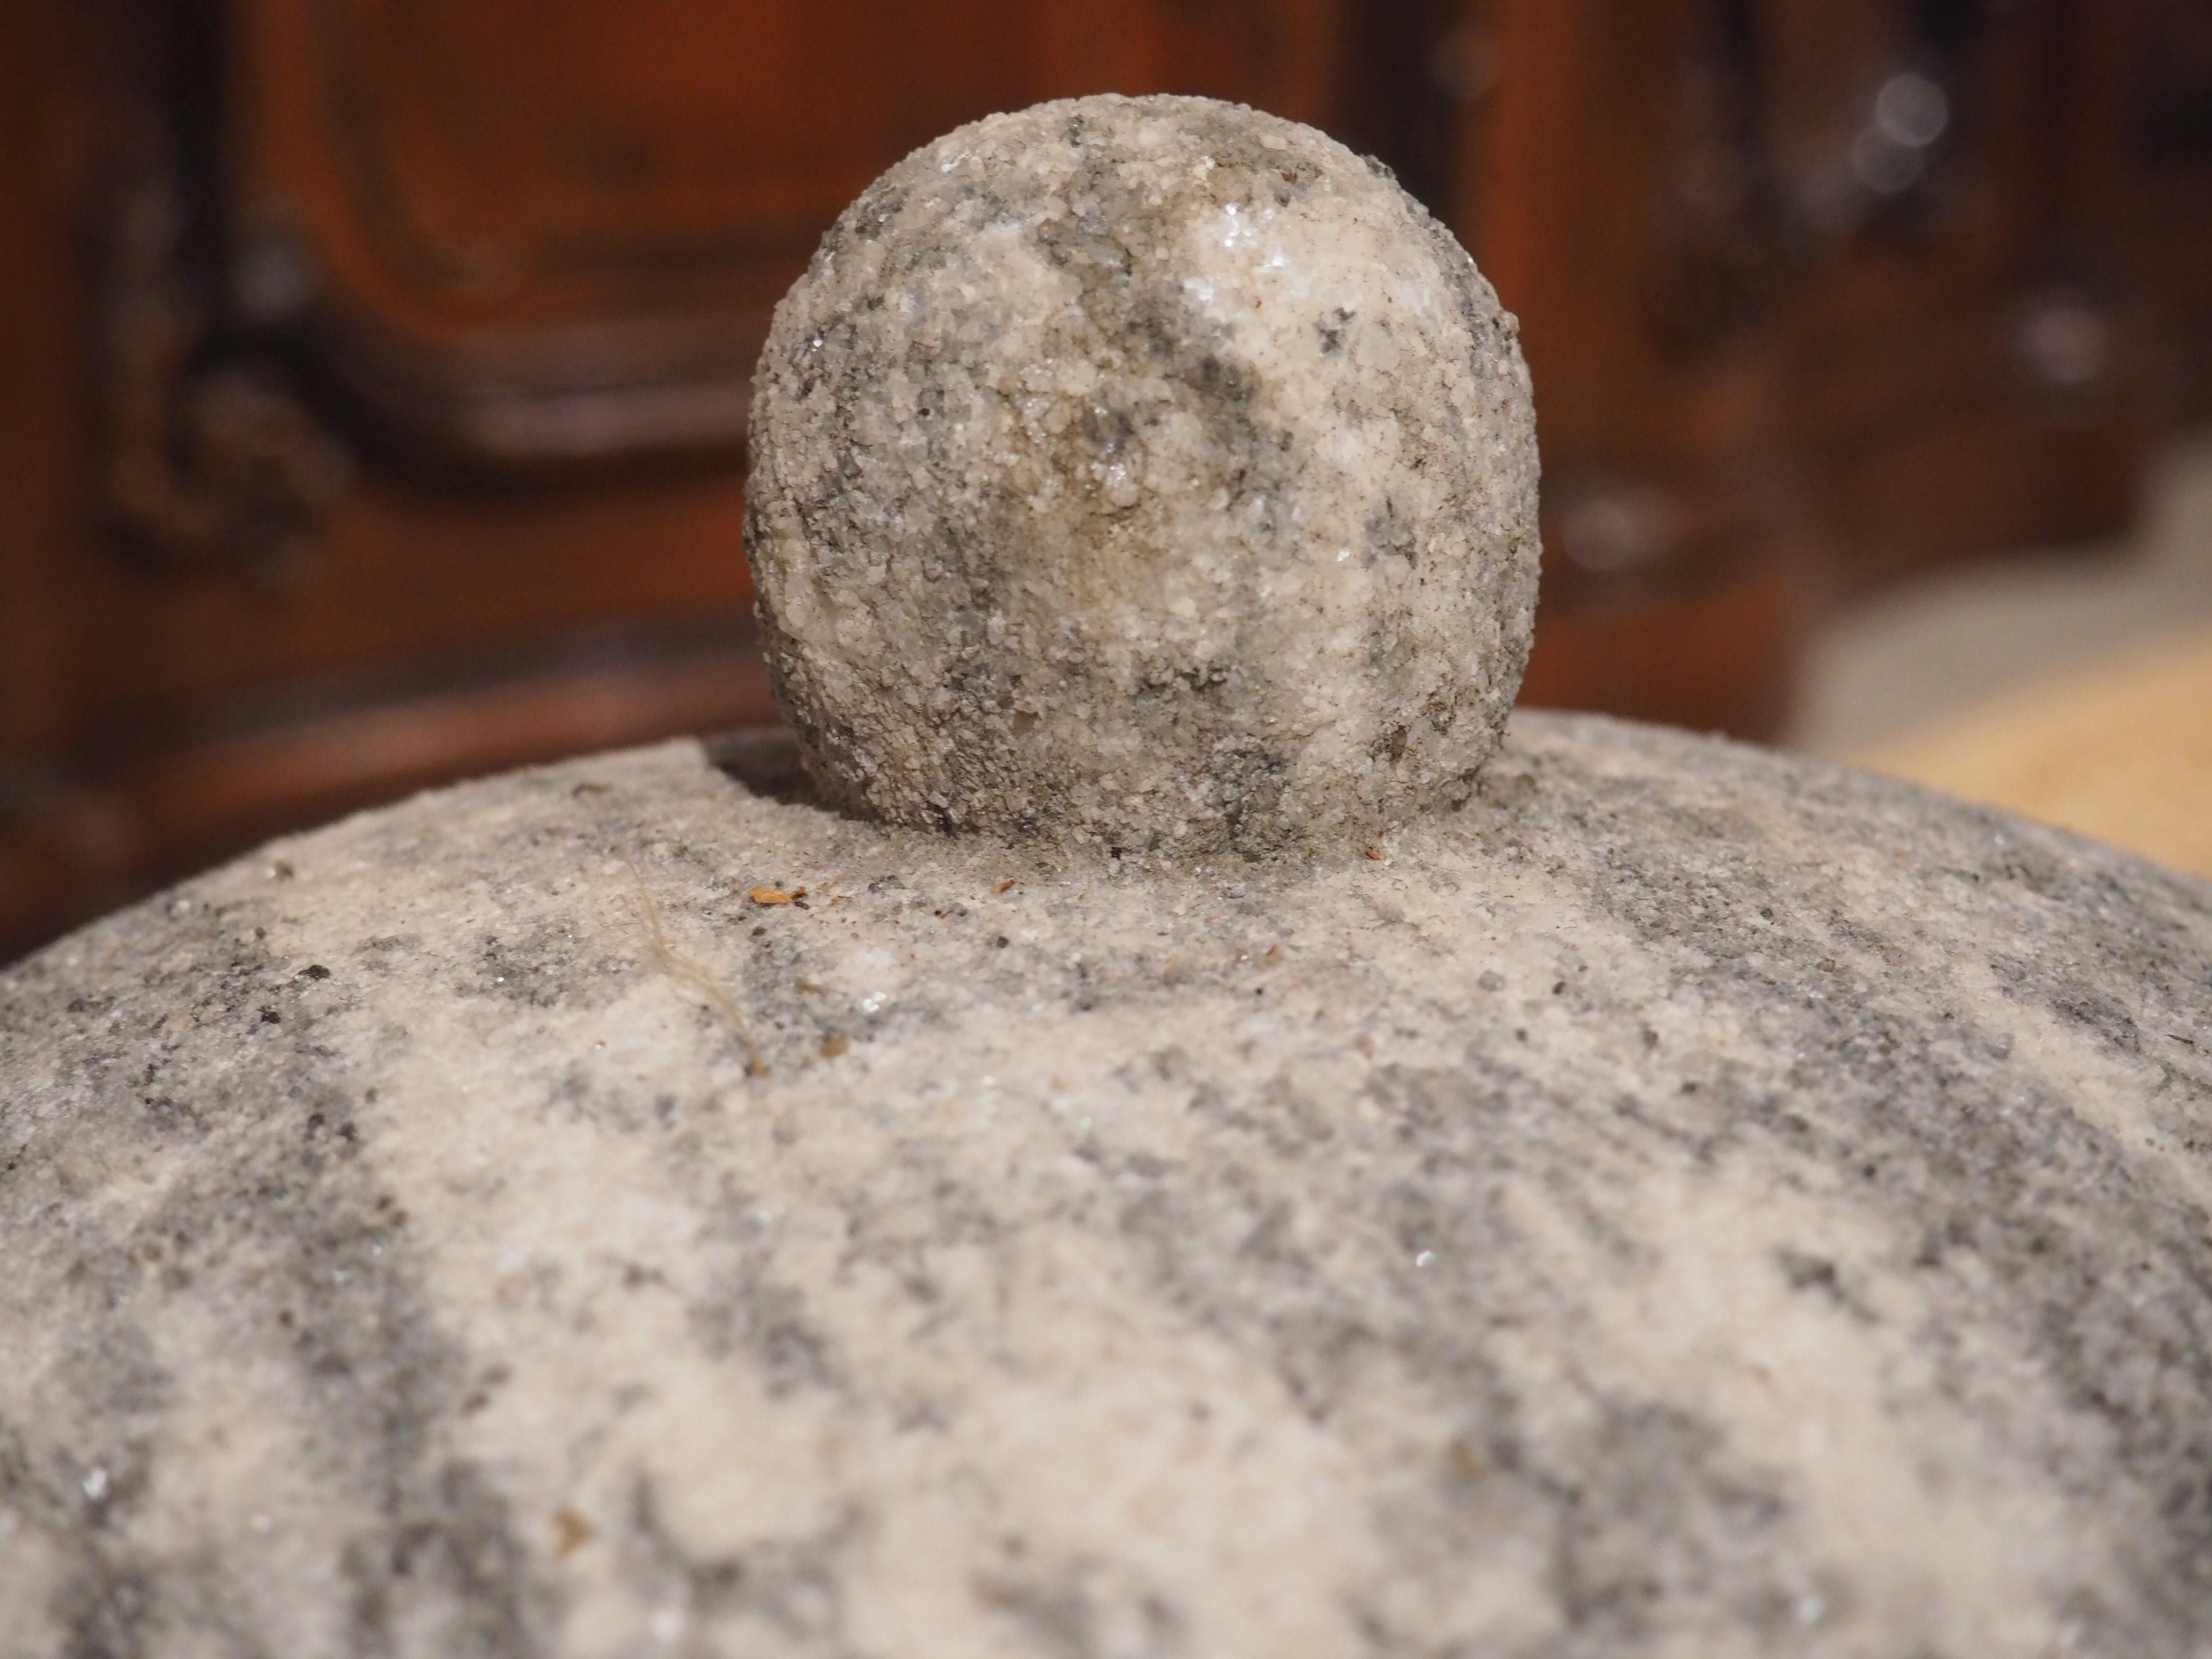 This marble crown finial was hand-carved in Italy in the 1800’s. The marble is cream colored with fascinating gray striped veining. Years of patina build up has also added a darker gray hue in some spots, specifically around the base.

The marble